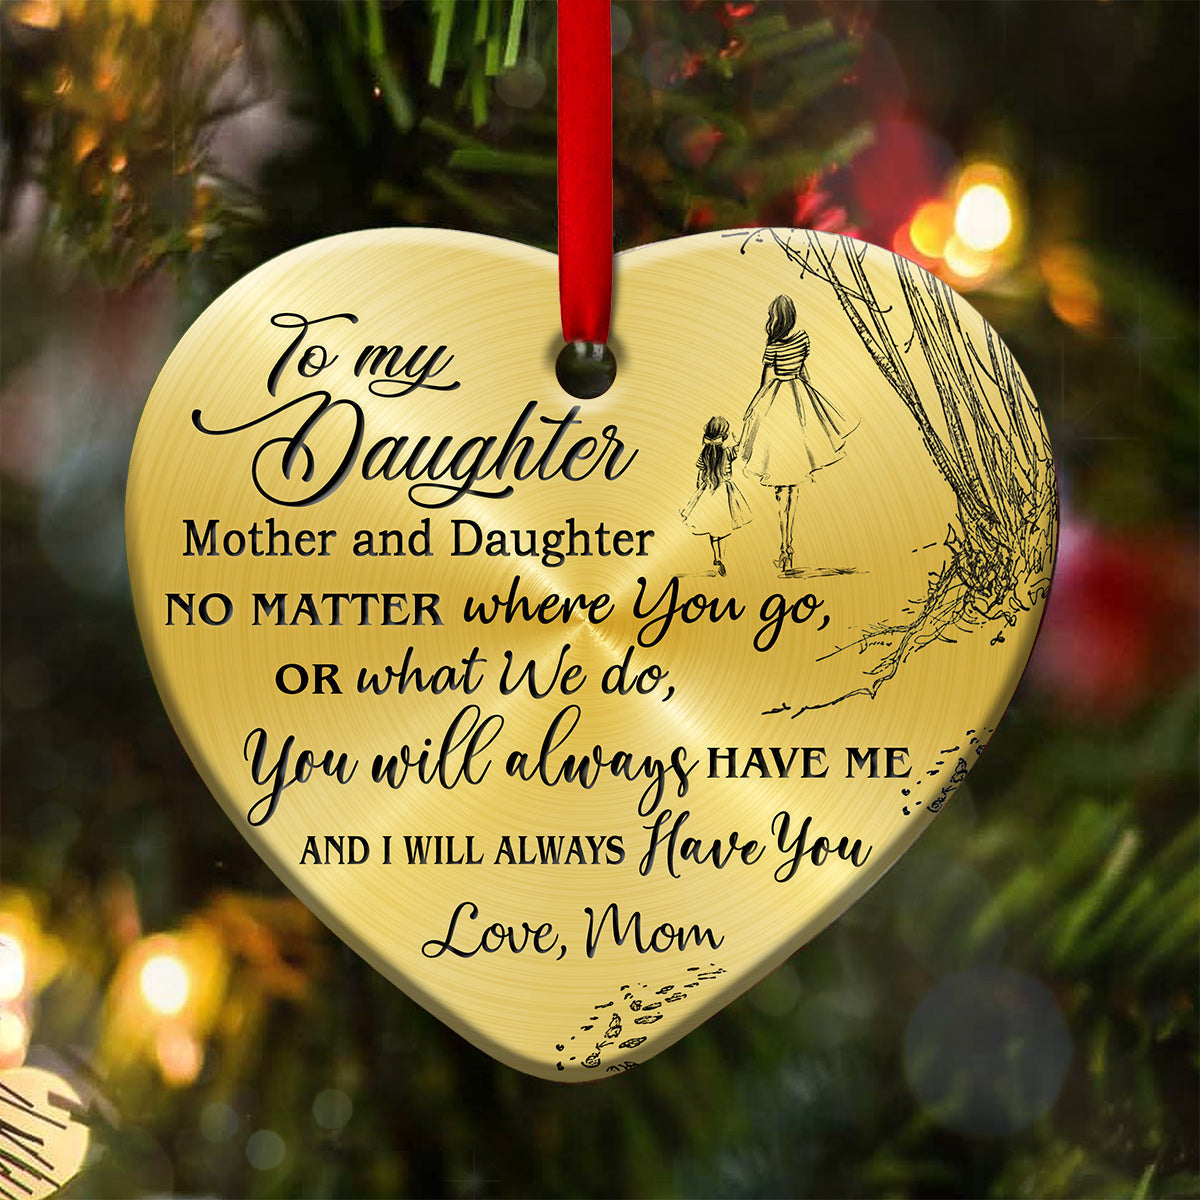 To My Daughter 5 Heart Ceramic Ornament - Christmas Ornament - Christmas Gift